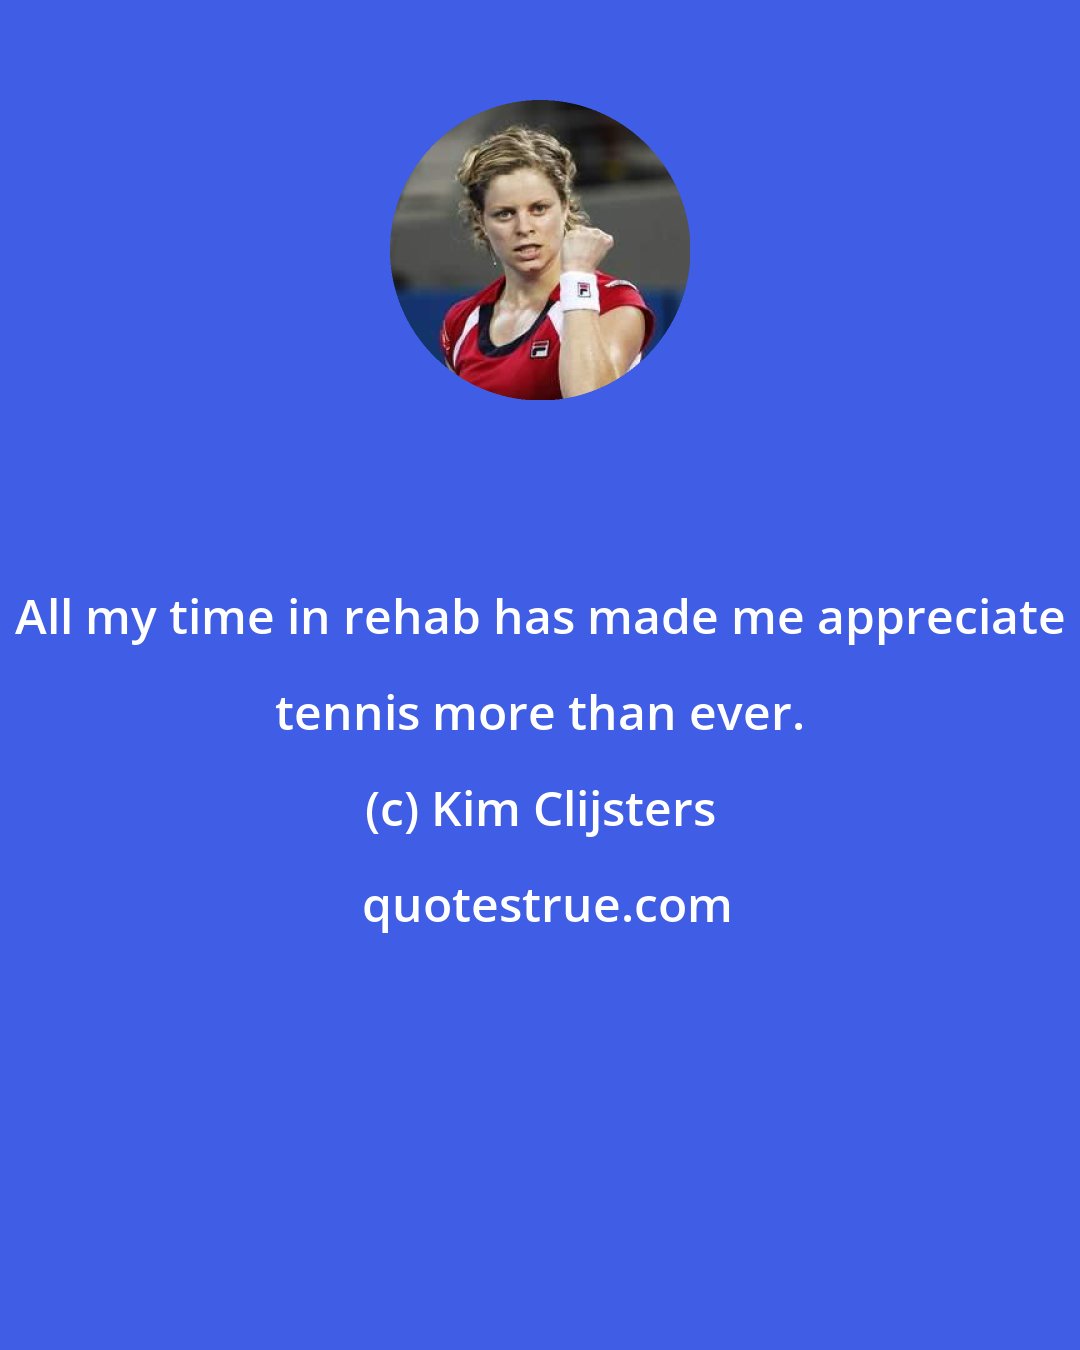 Kim Clijsters: All my time in rehab has made me appreciate tennis more than ever.